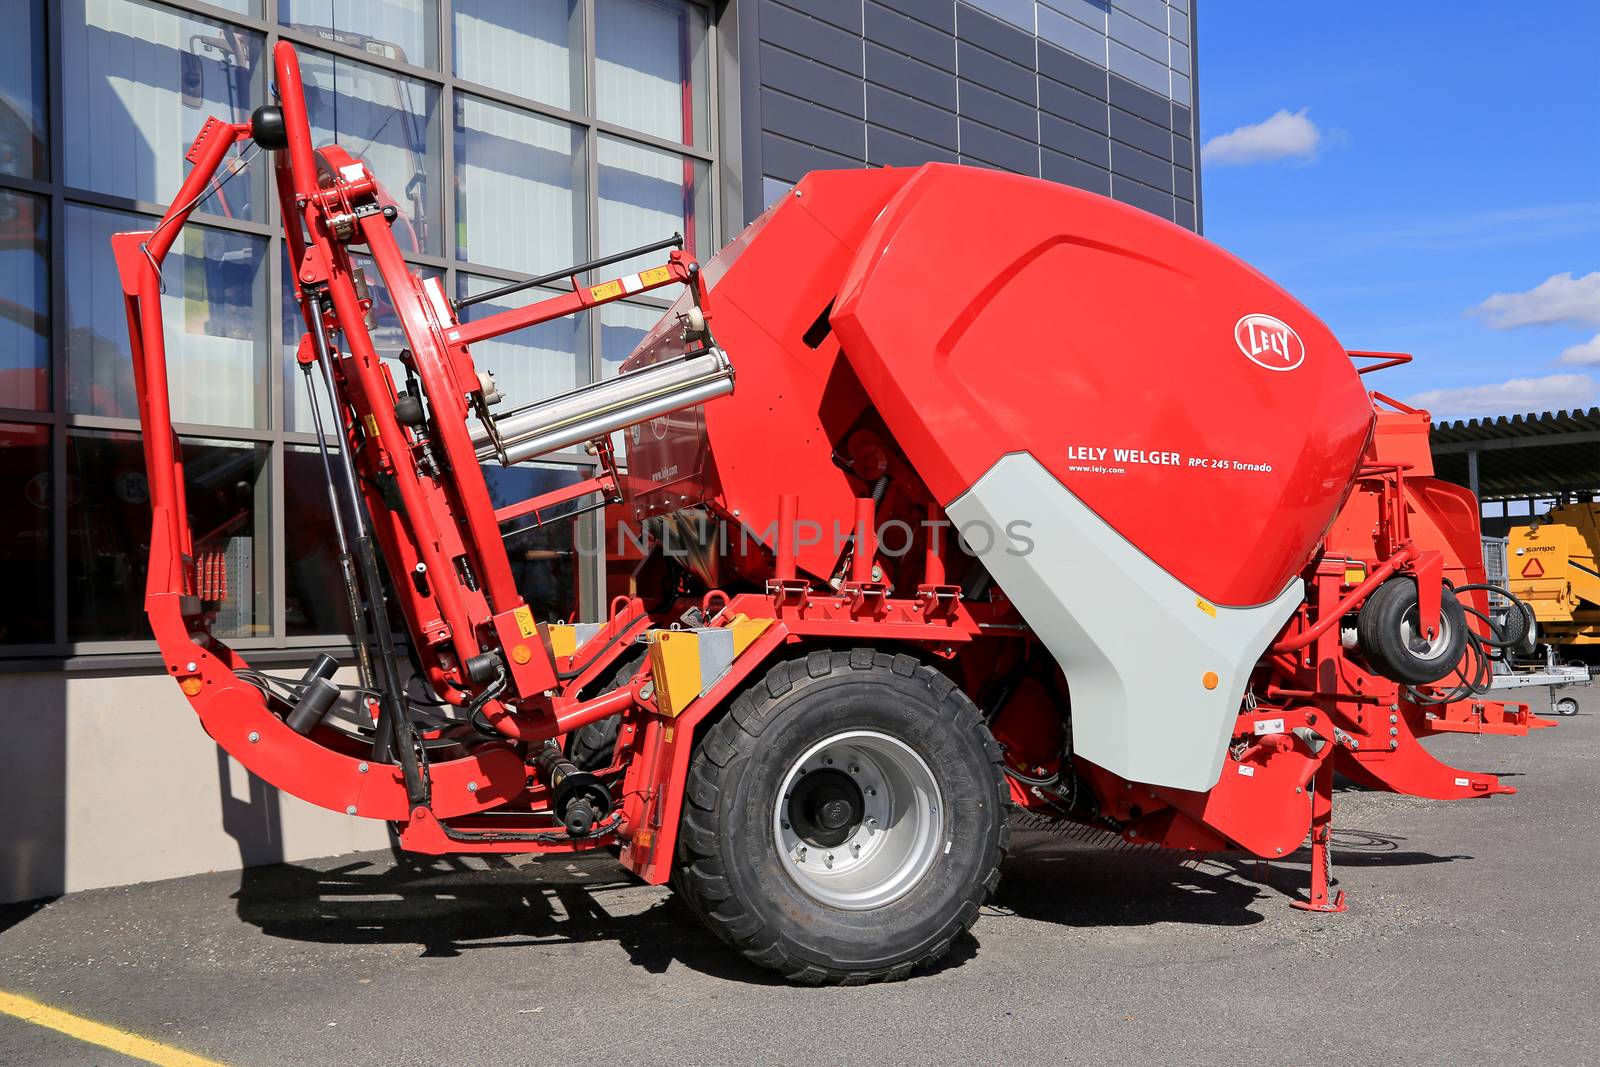 Lely Welger RPC 245 Tornado Baler Wrapper Combination Machine by Tainas